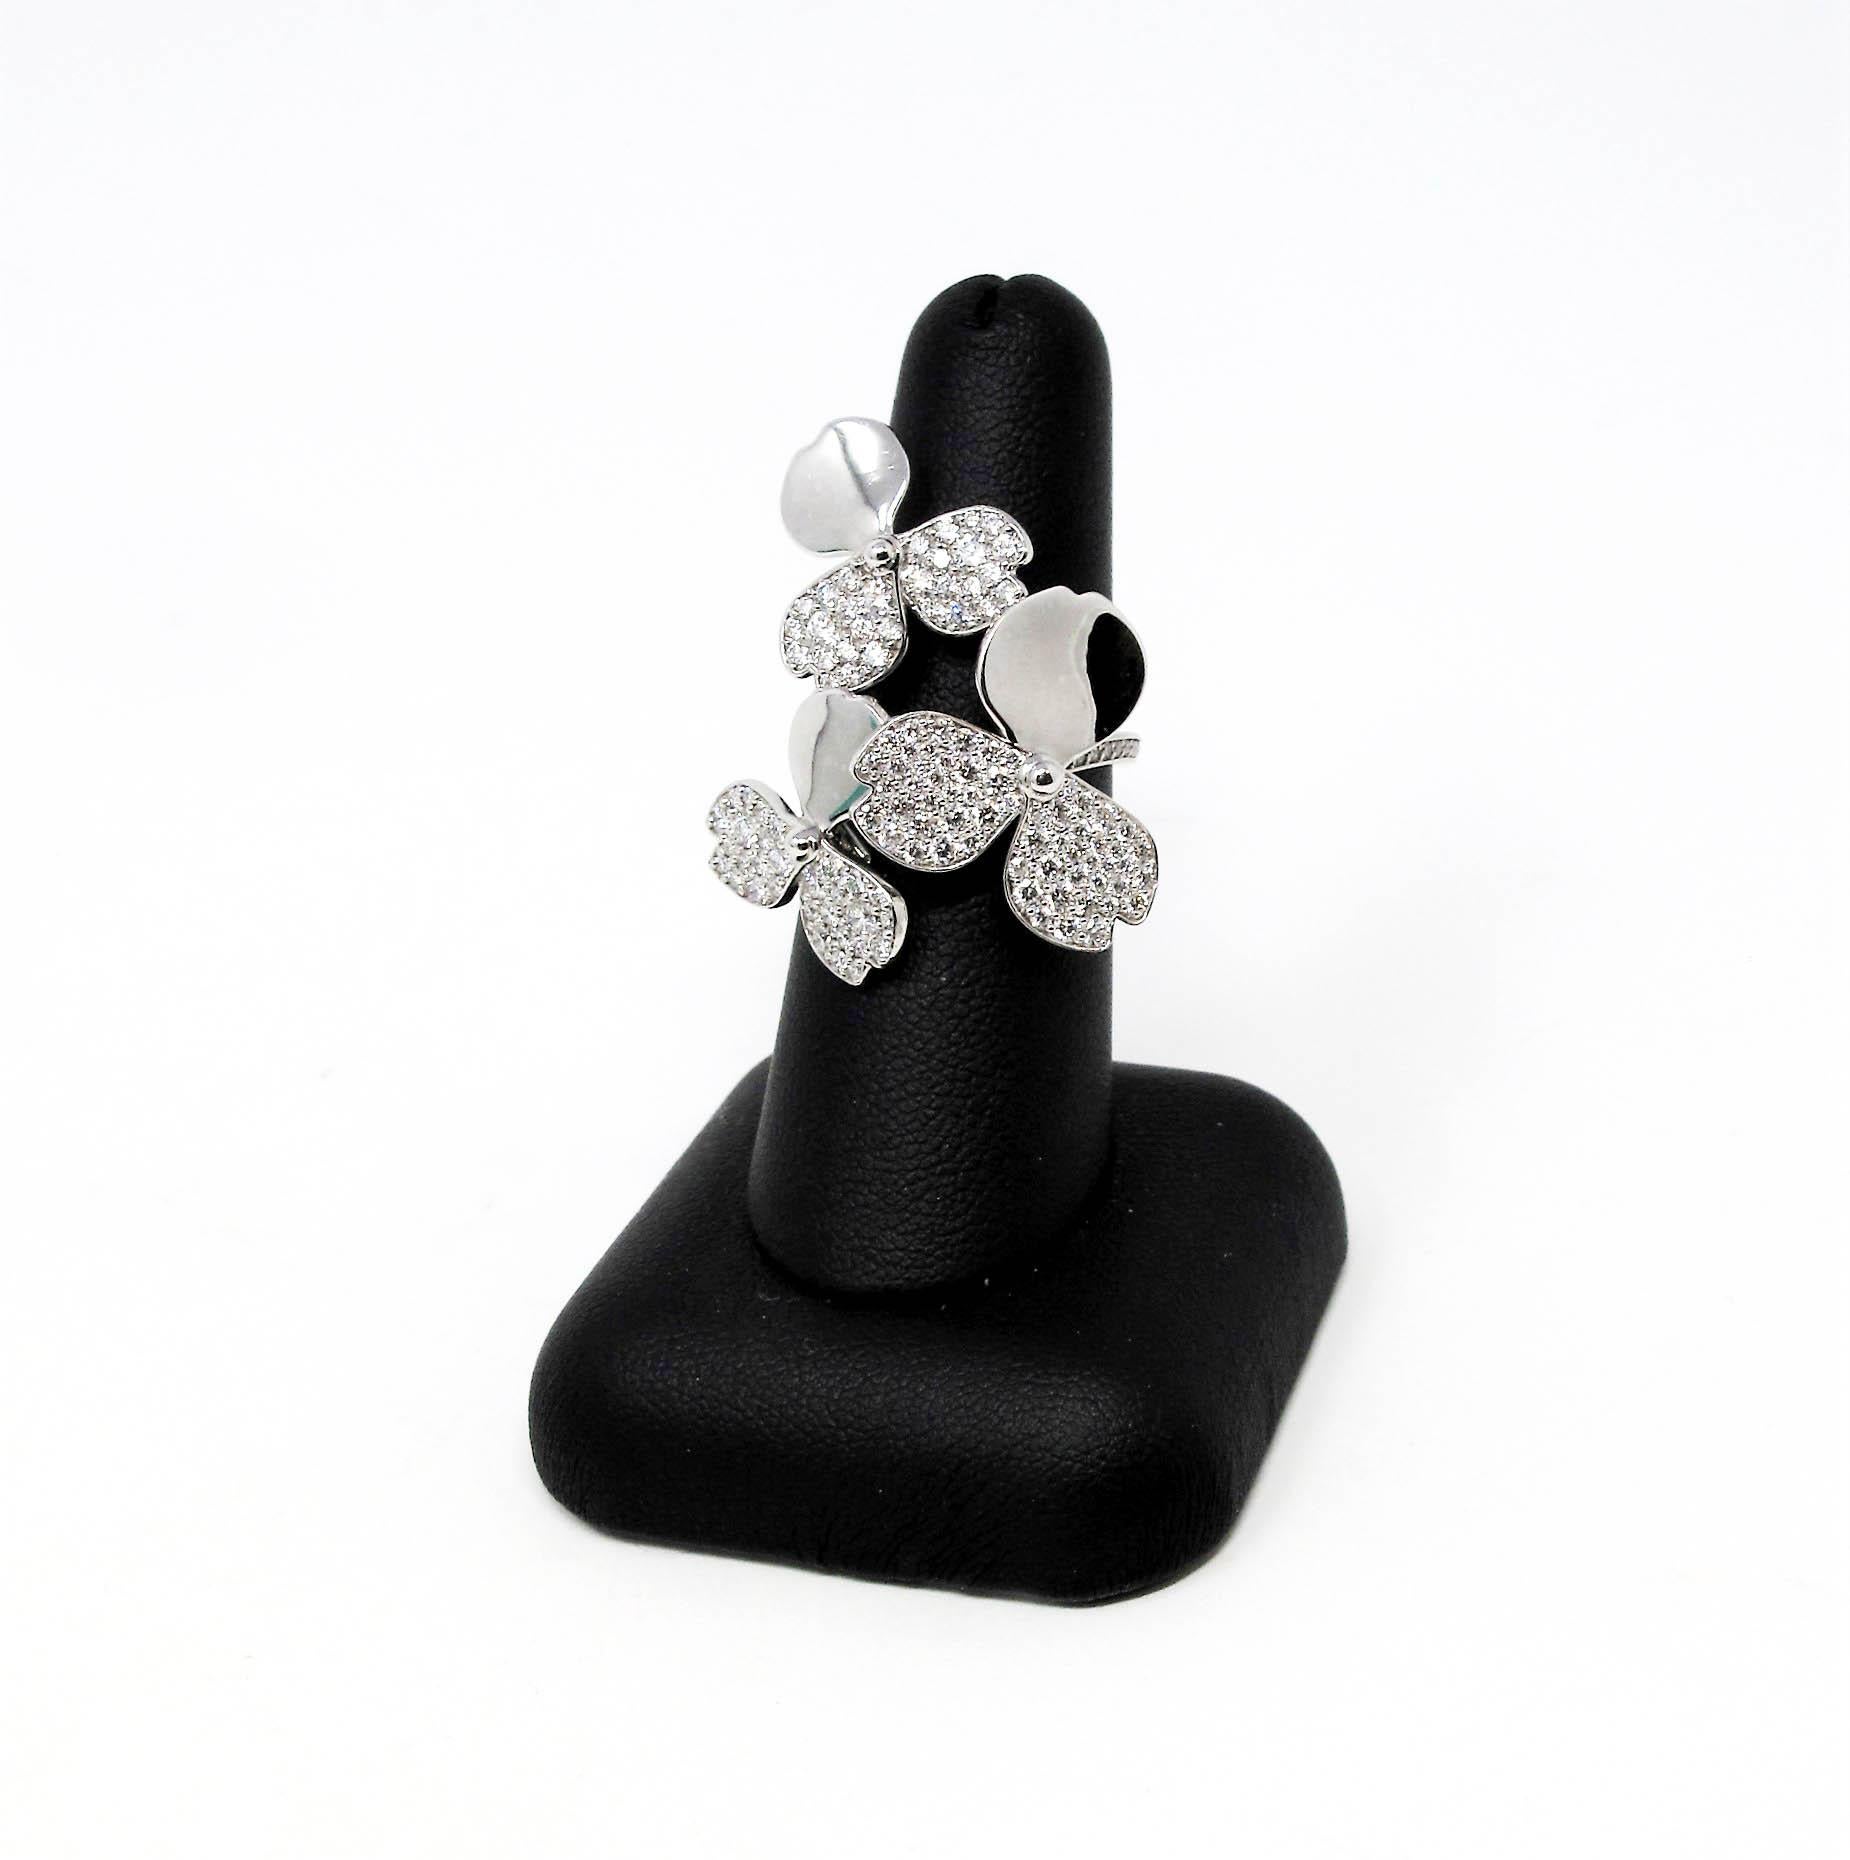 Ring Size: 7

Tiffany & Co. wows us once again with this absolutely incredible diamond cluster ring from the Tiffany & Co. 'Paper Flowers' collection. Substantial in both size and sparkle, this ring exudes modern femininity. 
 
This stunning ring is